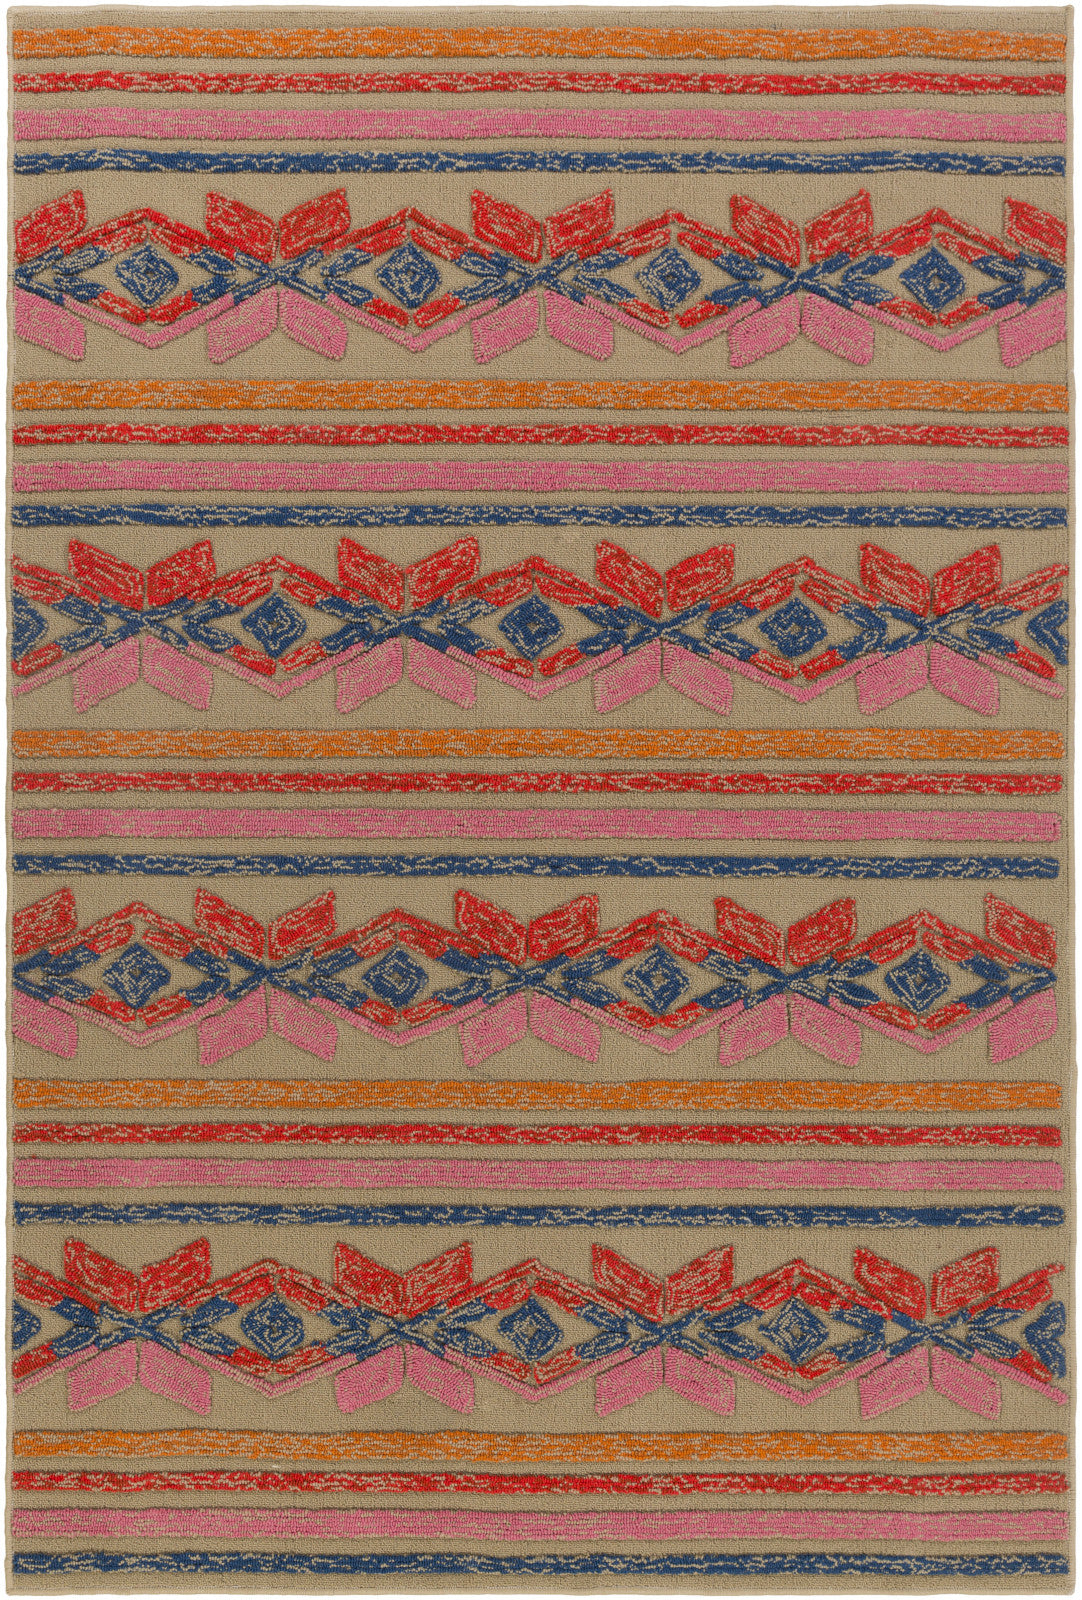 Artistic Weavers Mayan Star Poppy Red/Carnation Pink Area Rug main image